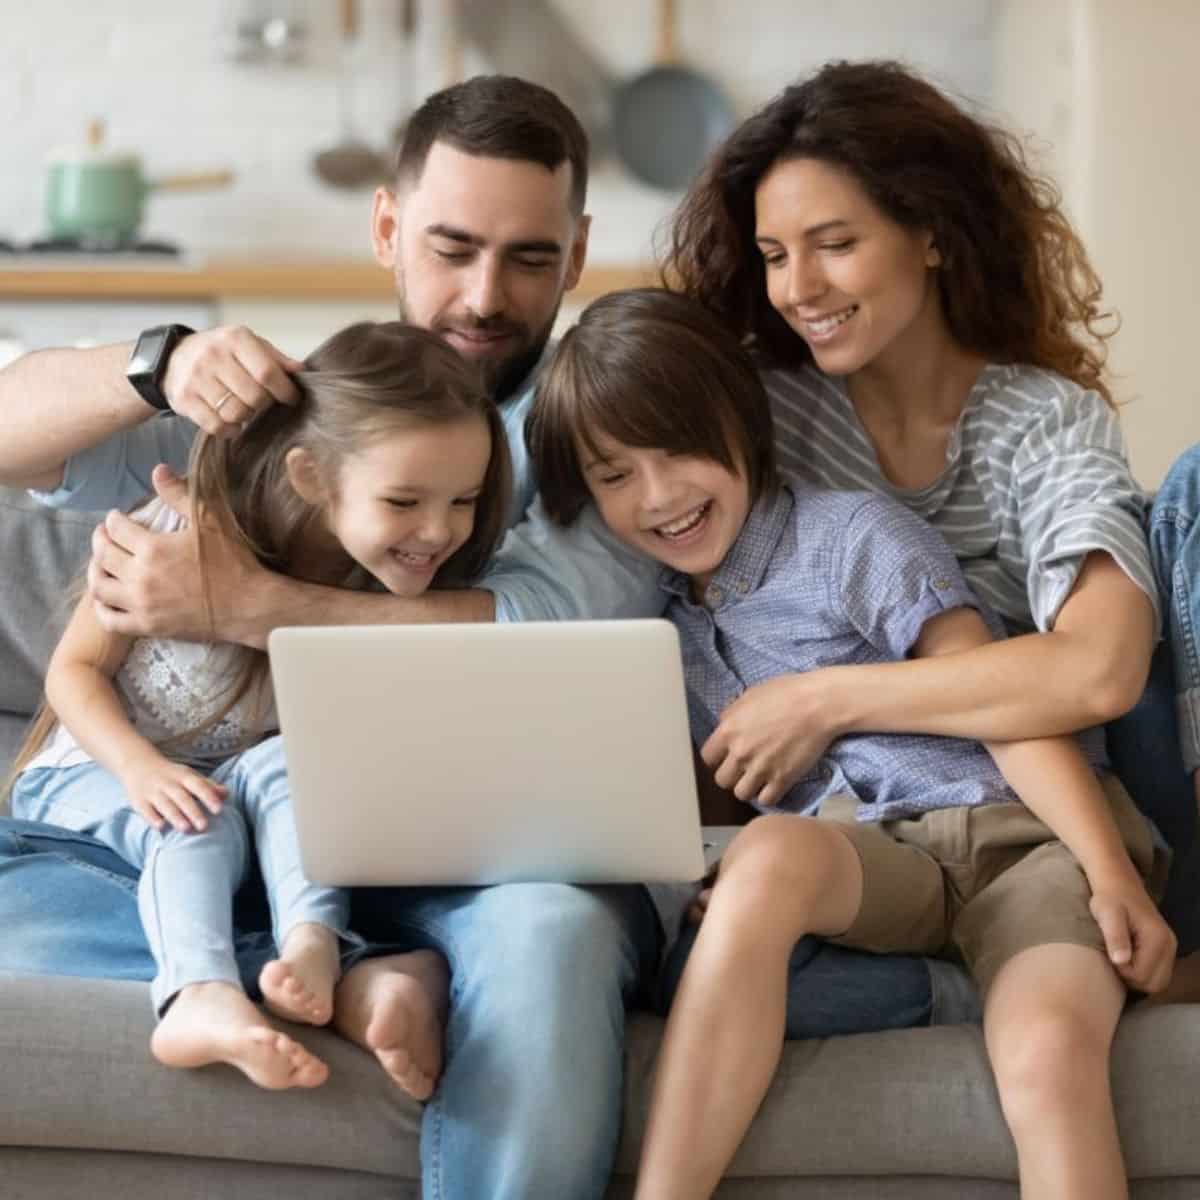 Image of young family sitting on a sofa and watching laptop.